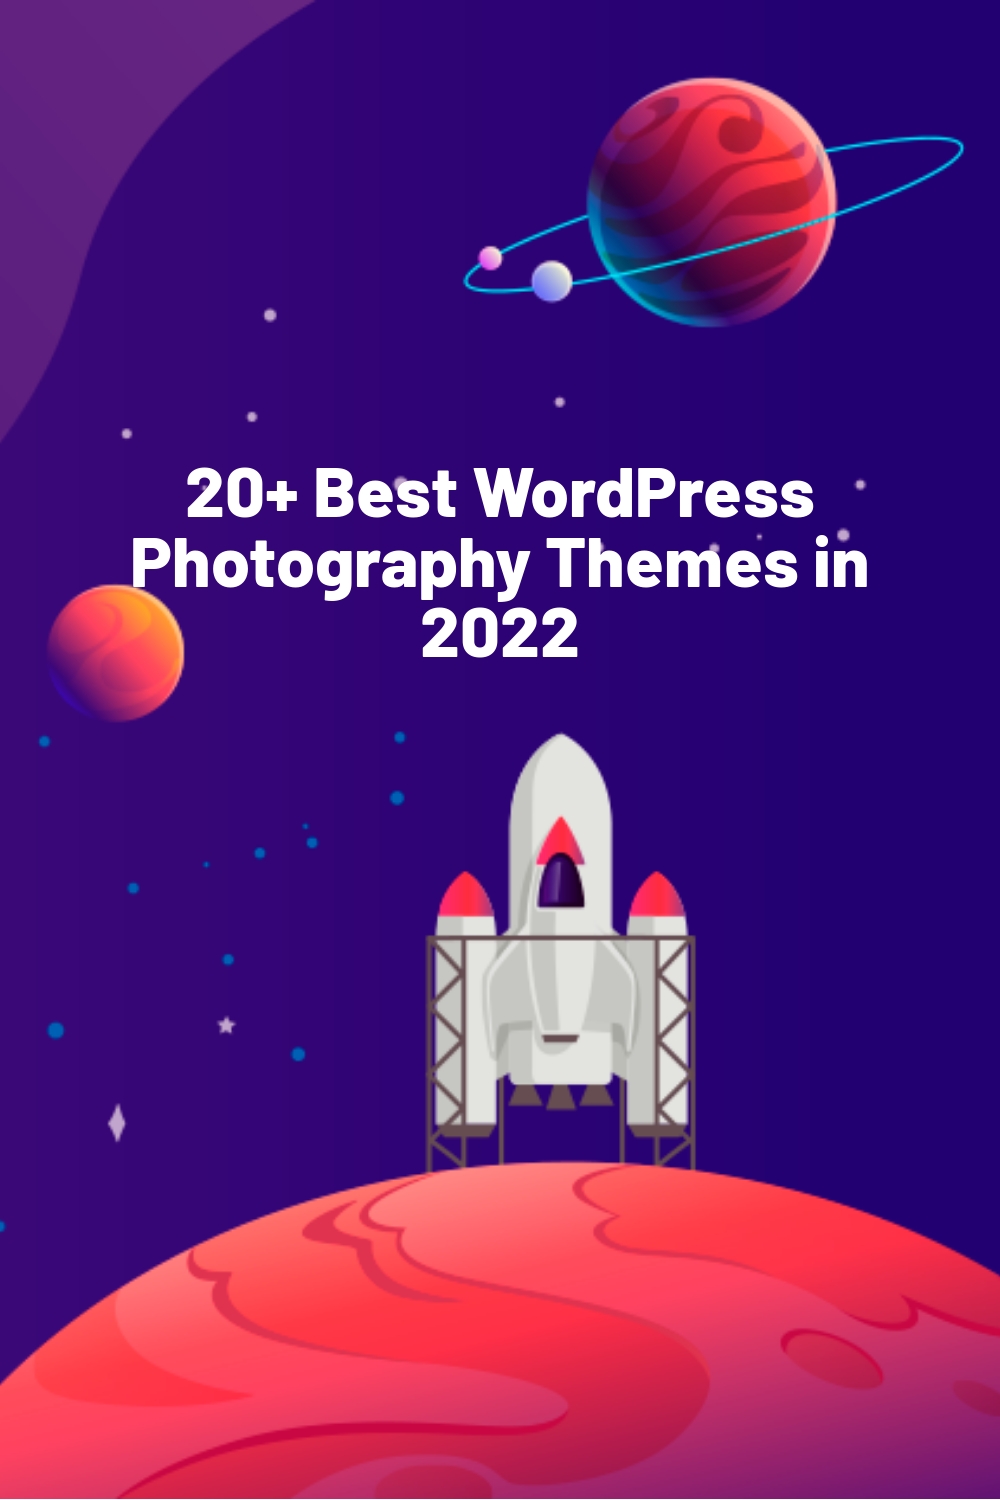 20+ Best WordPress Photography Themes in 2022